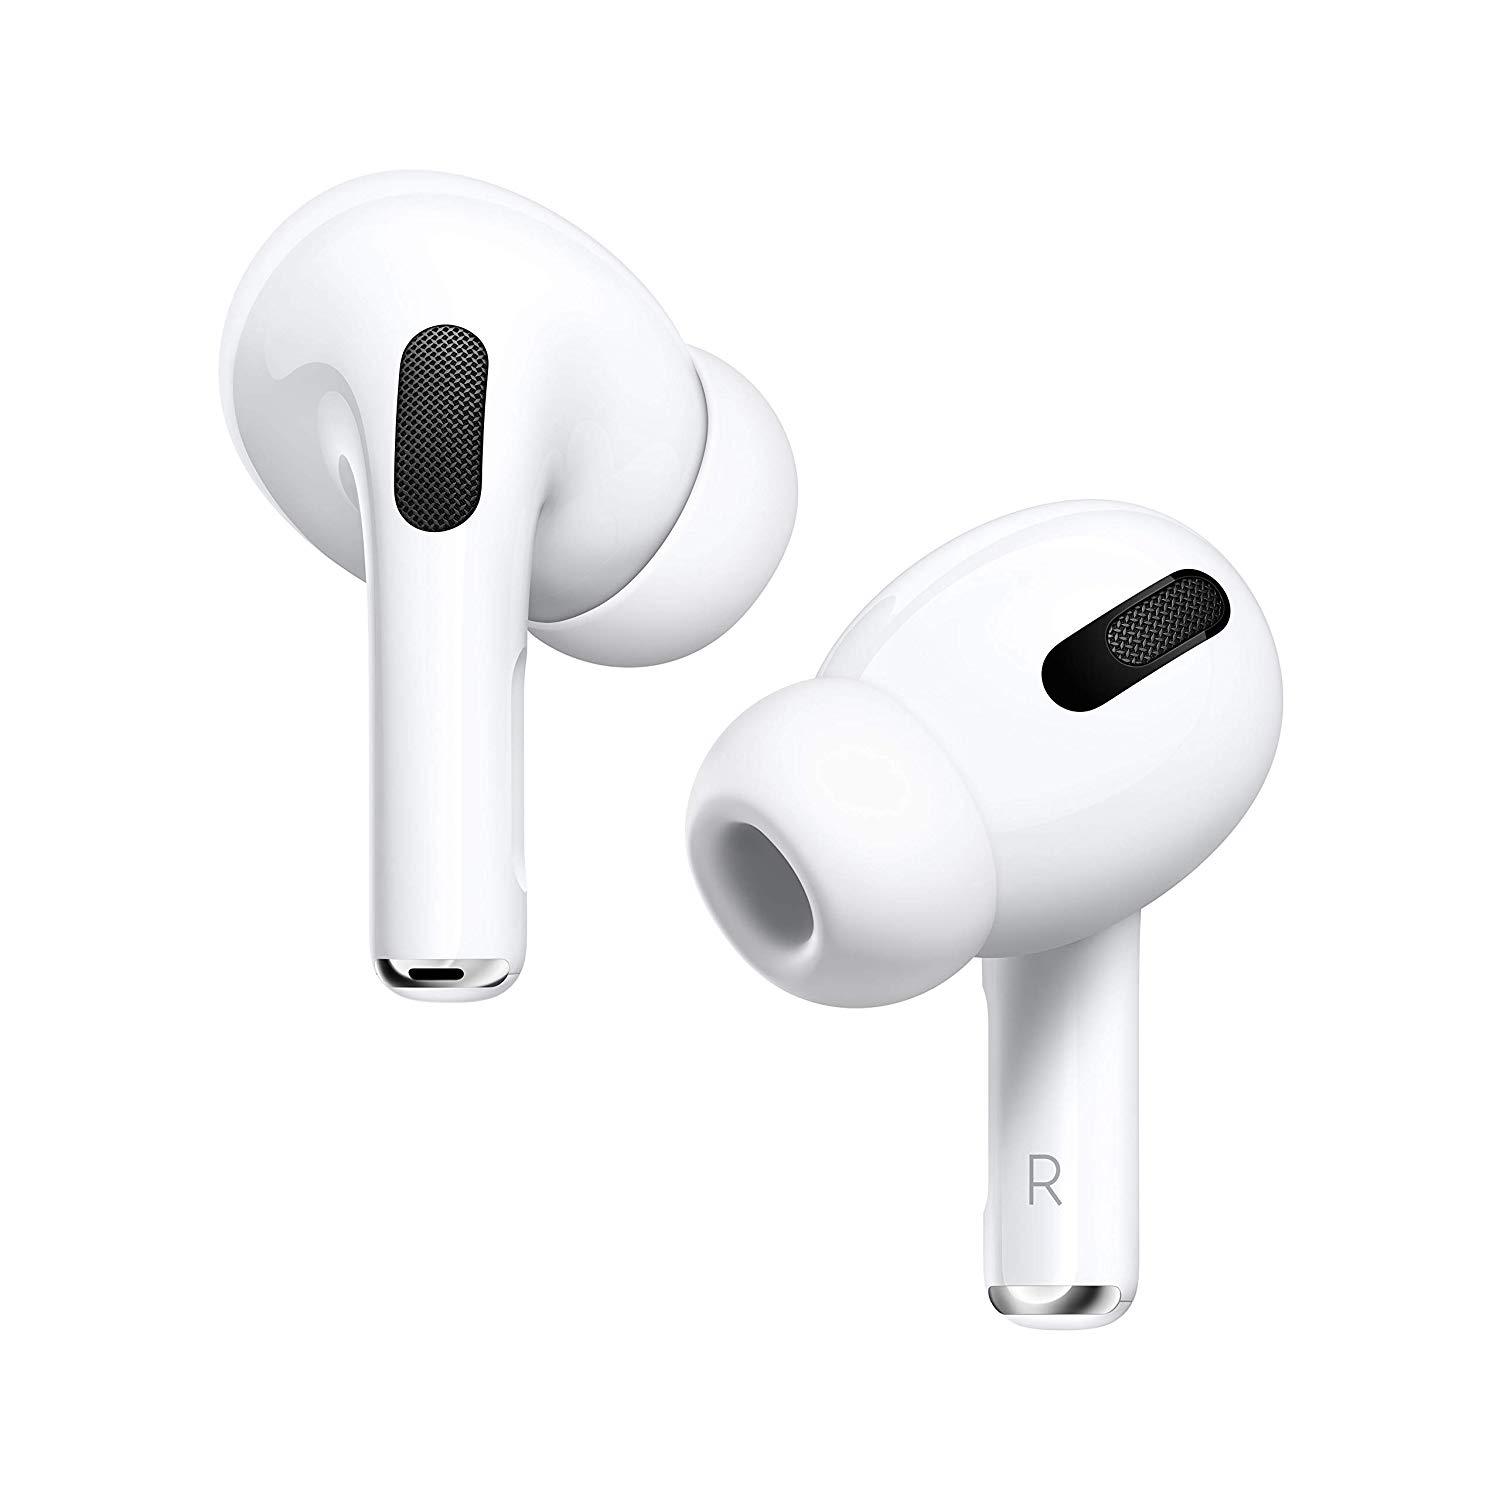 Apple AirPods Pro Black Friday offer